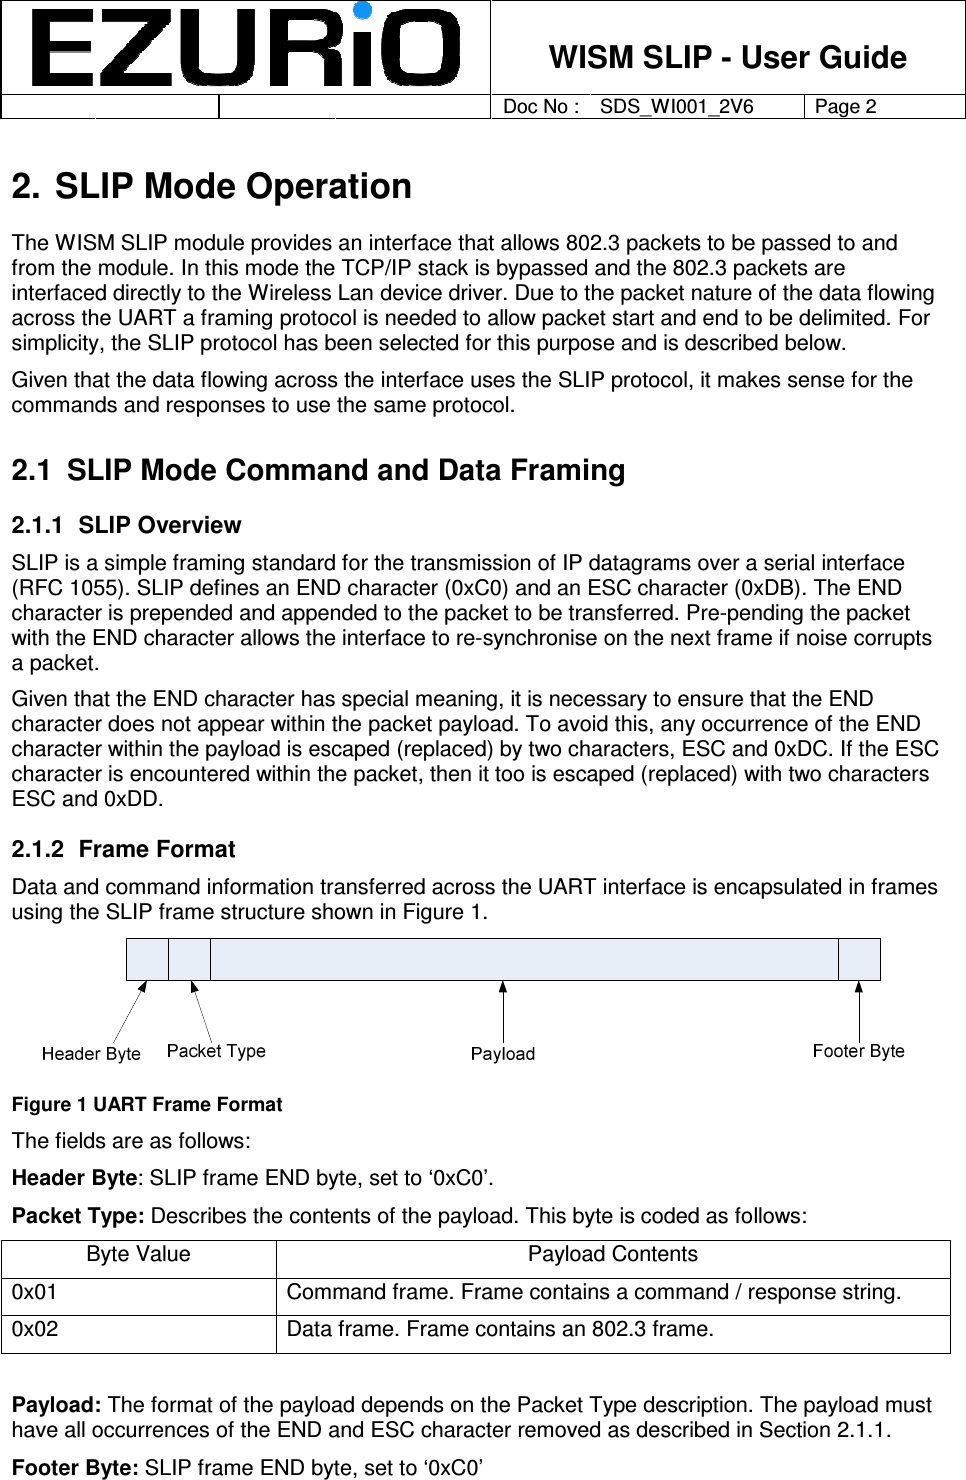    WISM SLIP - User Guide         Doc No : SDS_WI001_2V6 Page 2     2. SLIP Mode Operation The WISM SLIP module provides an interface that allows 802.3 packets to be passed to and from the module. In this mode the TCP/IP stack is bypassed and the 802.3 packets are interfaced directly to the Wireless Lan device driver. Due to the packet nature of the data flowing across the UART a framing protocol is needed to allow packet start and end to be delimited. For simplicity, the SLIP protocol has been selected for this purpose and is described below.  Given that the data flowing across the interface uses the SLIP protocol, it makes sense for the commands and responses to use the same protocol.  2.1  SLIP Mode Command and Data Framing 2.1.1  SLIP Overview SLIP is a simple framing standard for the transmission of IP datagrams over a serial interface (RFC 1055). SLIP defines an END character (0xC0) and an ESC character (0xDB). The END character is prepended and appended to the packet to be transferred. Pre-pending the packet with the END character allows the interface to re-synchronise on the next frame if noise corrupts a packet.  Given that the END character has special meaning, it is necessary to ensure that the END character does not appear within the packet payload. To avoid this, any occurrence of the END character within the payload is escaped (replaced) by two characters, ESC and 0xDC. If the ESC character is encountered within the packet, then it too is escaped (replaced) with two characters ESC and 0xDD.      2.1.2  Frame Format Data and command information transferred across the UART interface is encapsulated in frames using the SLIP frame structure shown in Figure 1.  Figure 1 UART Frame Format The fields are as follows: Header Byte: SLIP frame END byte, set to ‘0xC0’.  Packet Type: Describes the contents of the payload. This byte is coded as follows: Byte Value  Payload Contents 0x01  Command frame. Frame contains a command / response string.   0x02  Data frame. Frame contains an 802.3 frame.  Payload: The format of the payload depends on the Packet Type description. The payload must have all occurrences of the END and ESC character removed as described in Section 2.1.1.  Footer Byte: SLIP frame END byte, set to ‘0xC0’ 